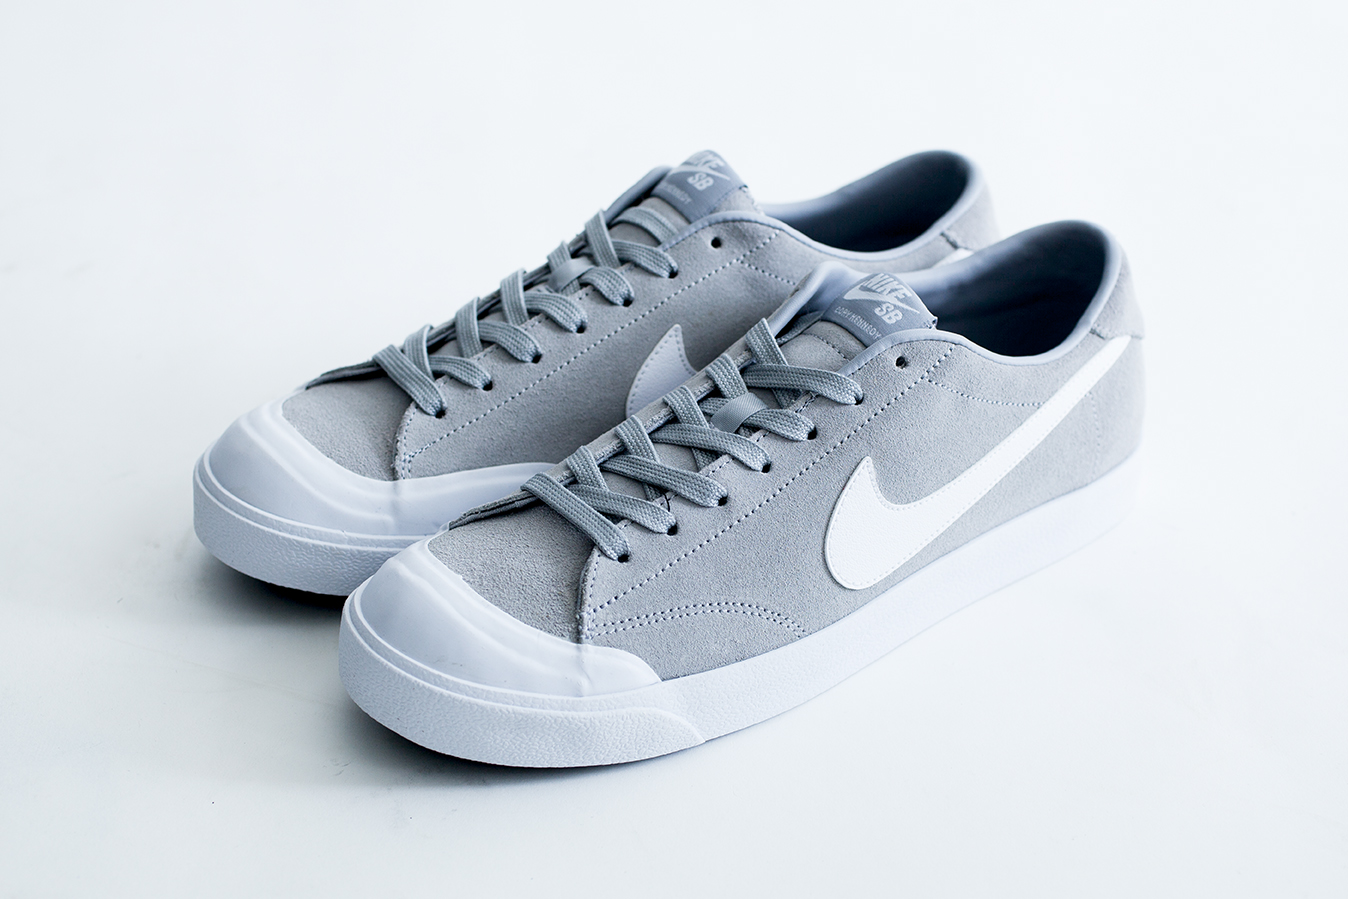 NIKE SB ZOOM ALL COURT CK RHC Ron Herman Exclusive｜Pick Up Item 